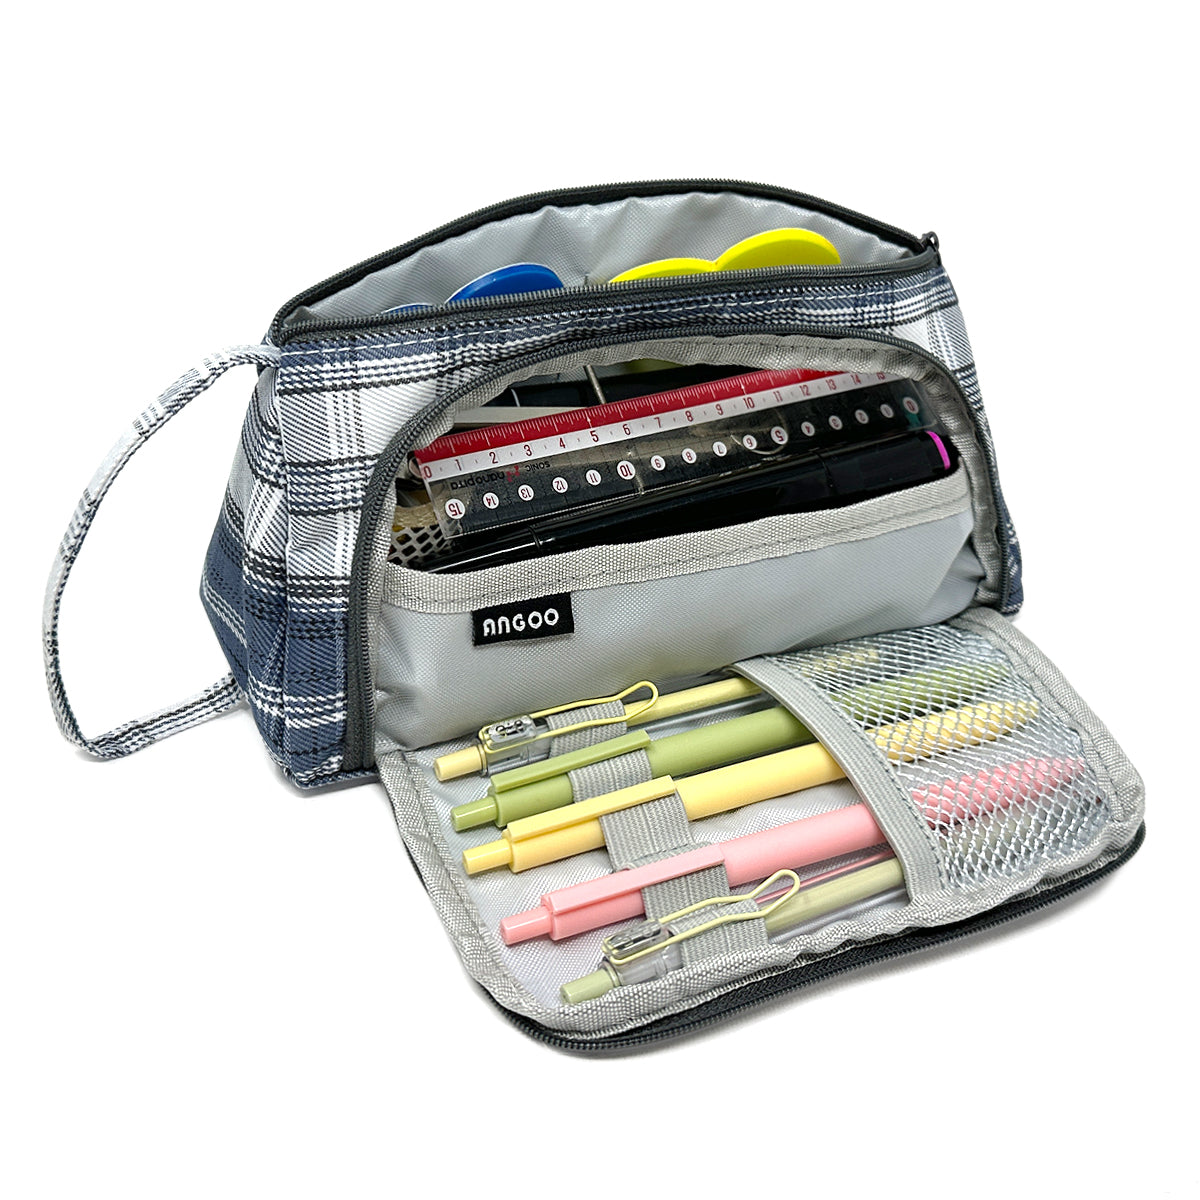 Worallymy Pencil Bag Large Capacity Pencils Case Pouch Holder Cotton Linen  Zipper Closure Stationery Storage Bags Organizer for Office Gray 